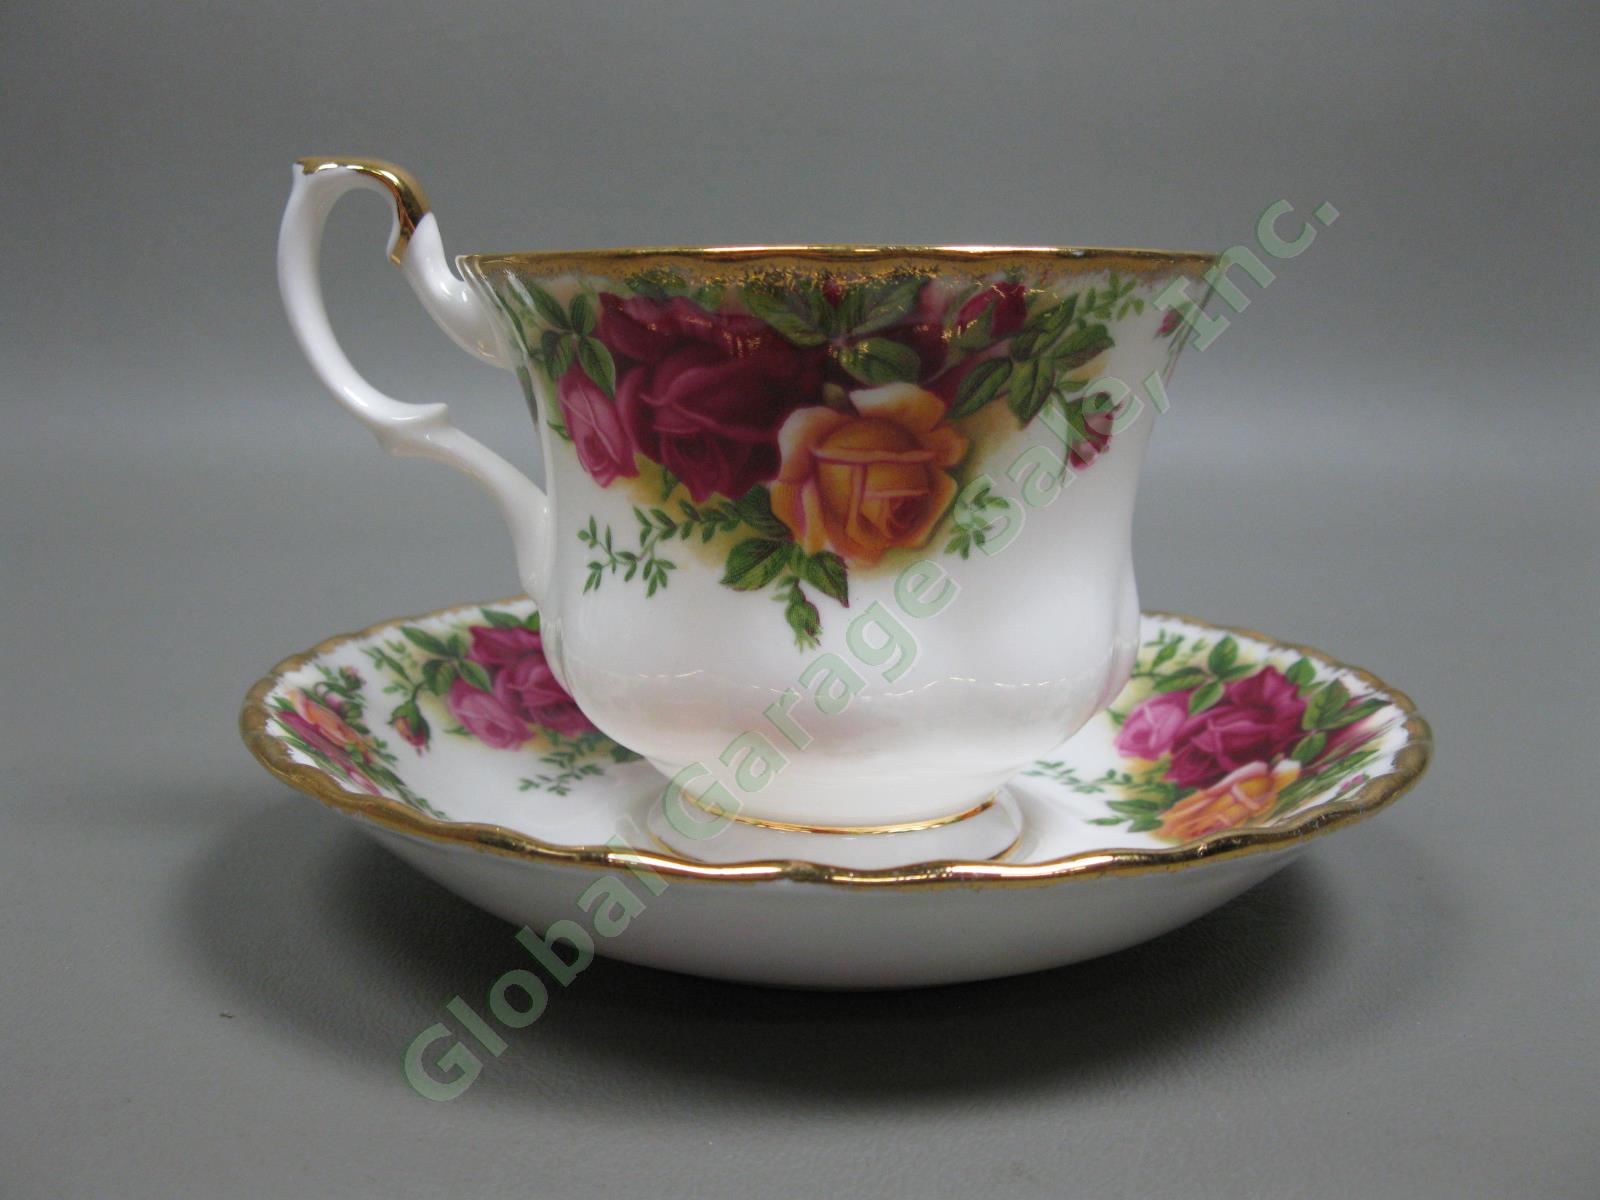 8 Royal Albert Old Country Roses Footed Tea Cup/Saucer Gold Trim Bone China Set 2